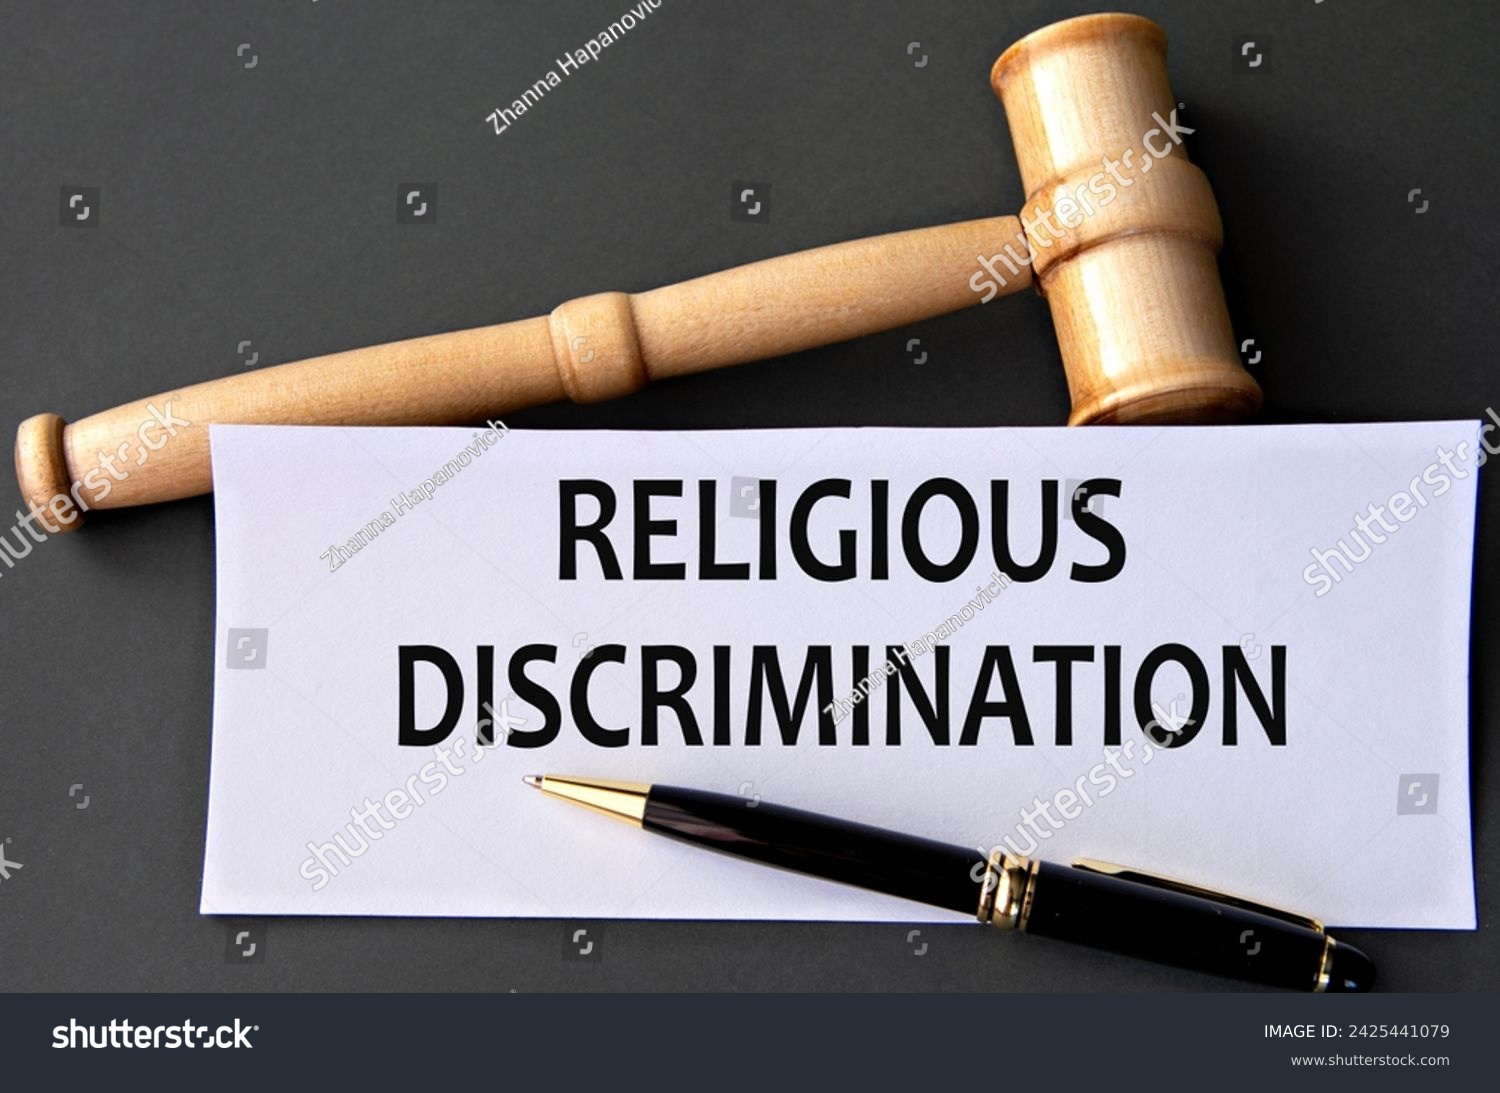 RELIGIOUS DISCRIMINATION - words on white paper on dark background with judge's gavel #2425441079